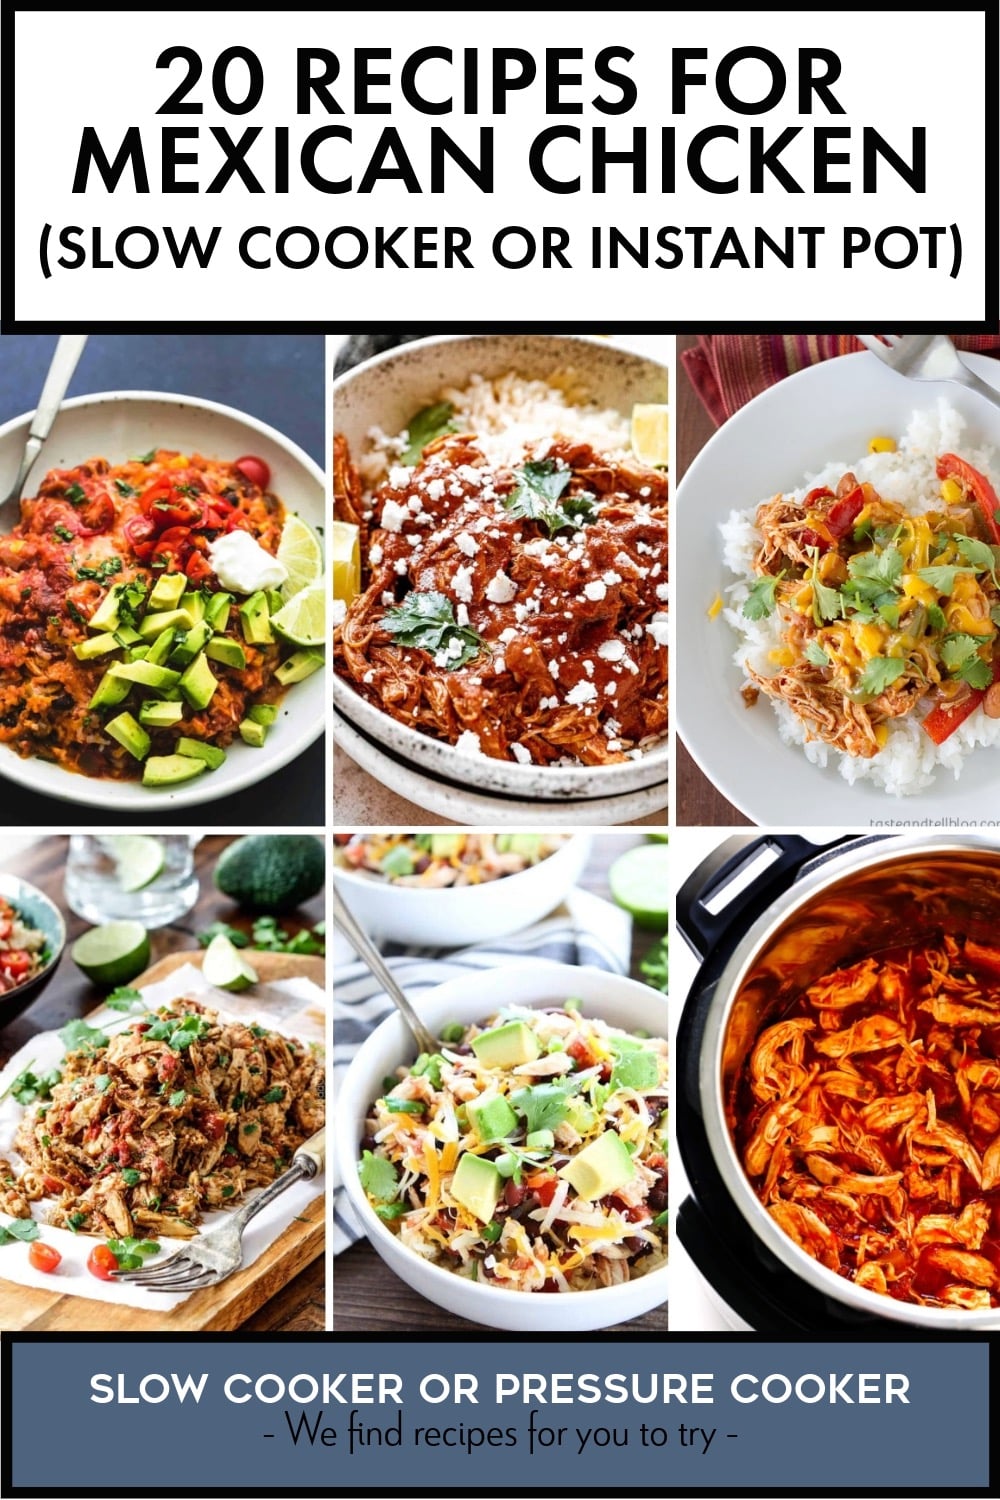 Pinterest image of 20 Recipes for Mexican Chicken (Slow Cooker or Instant Pot)